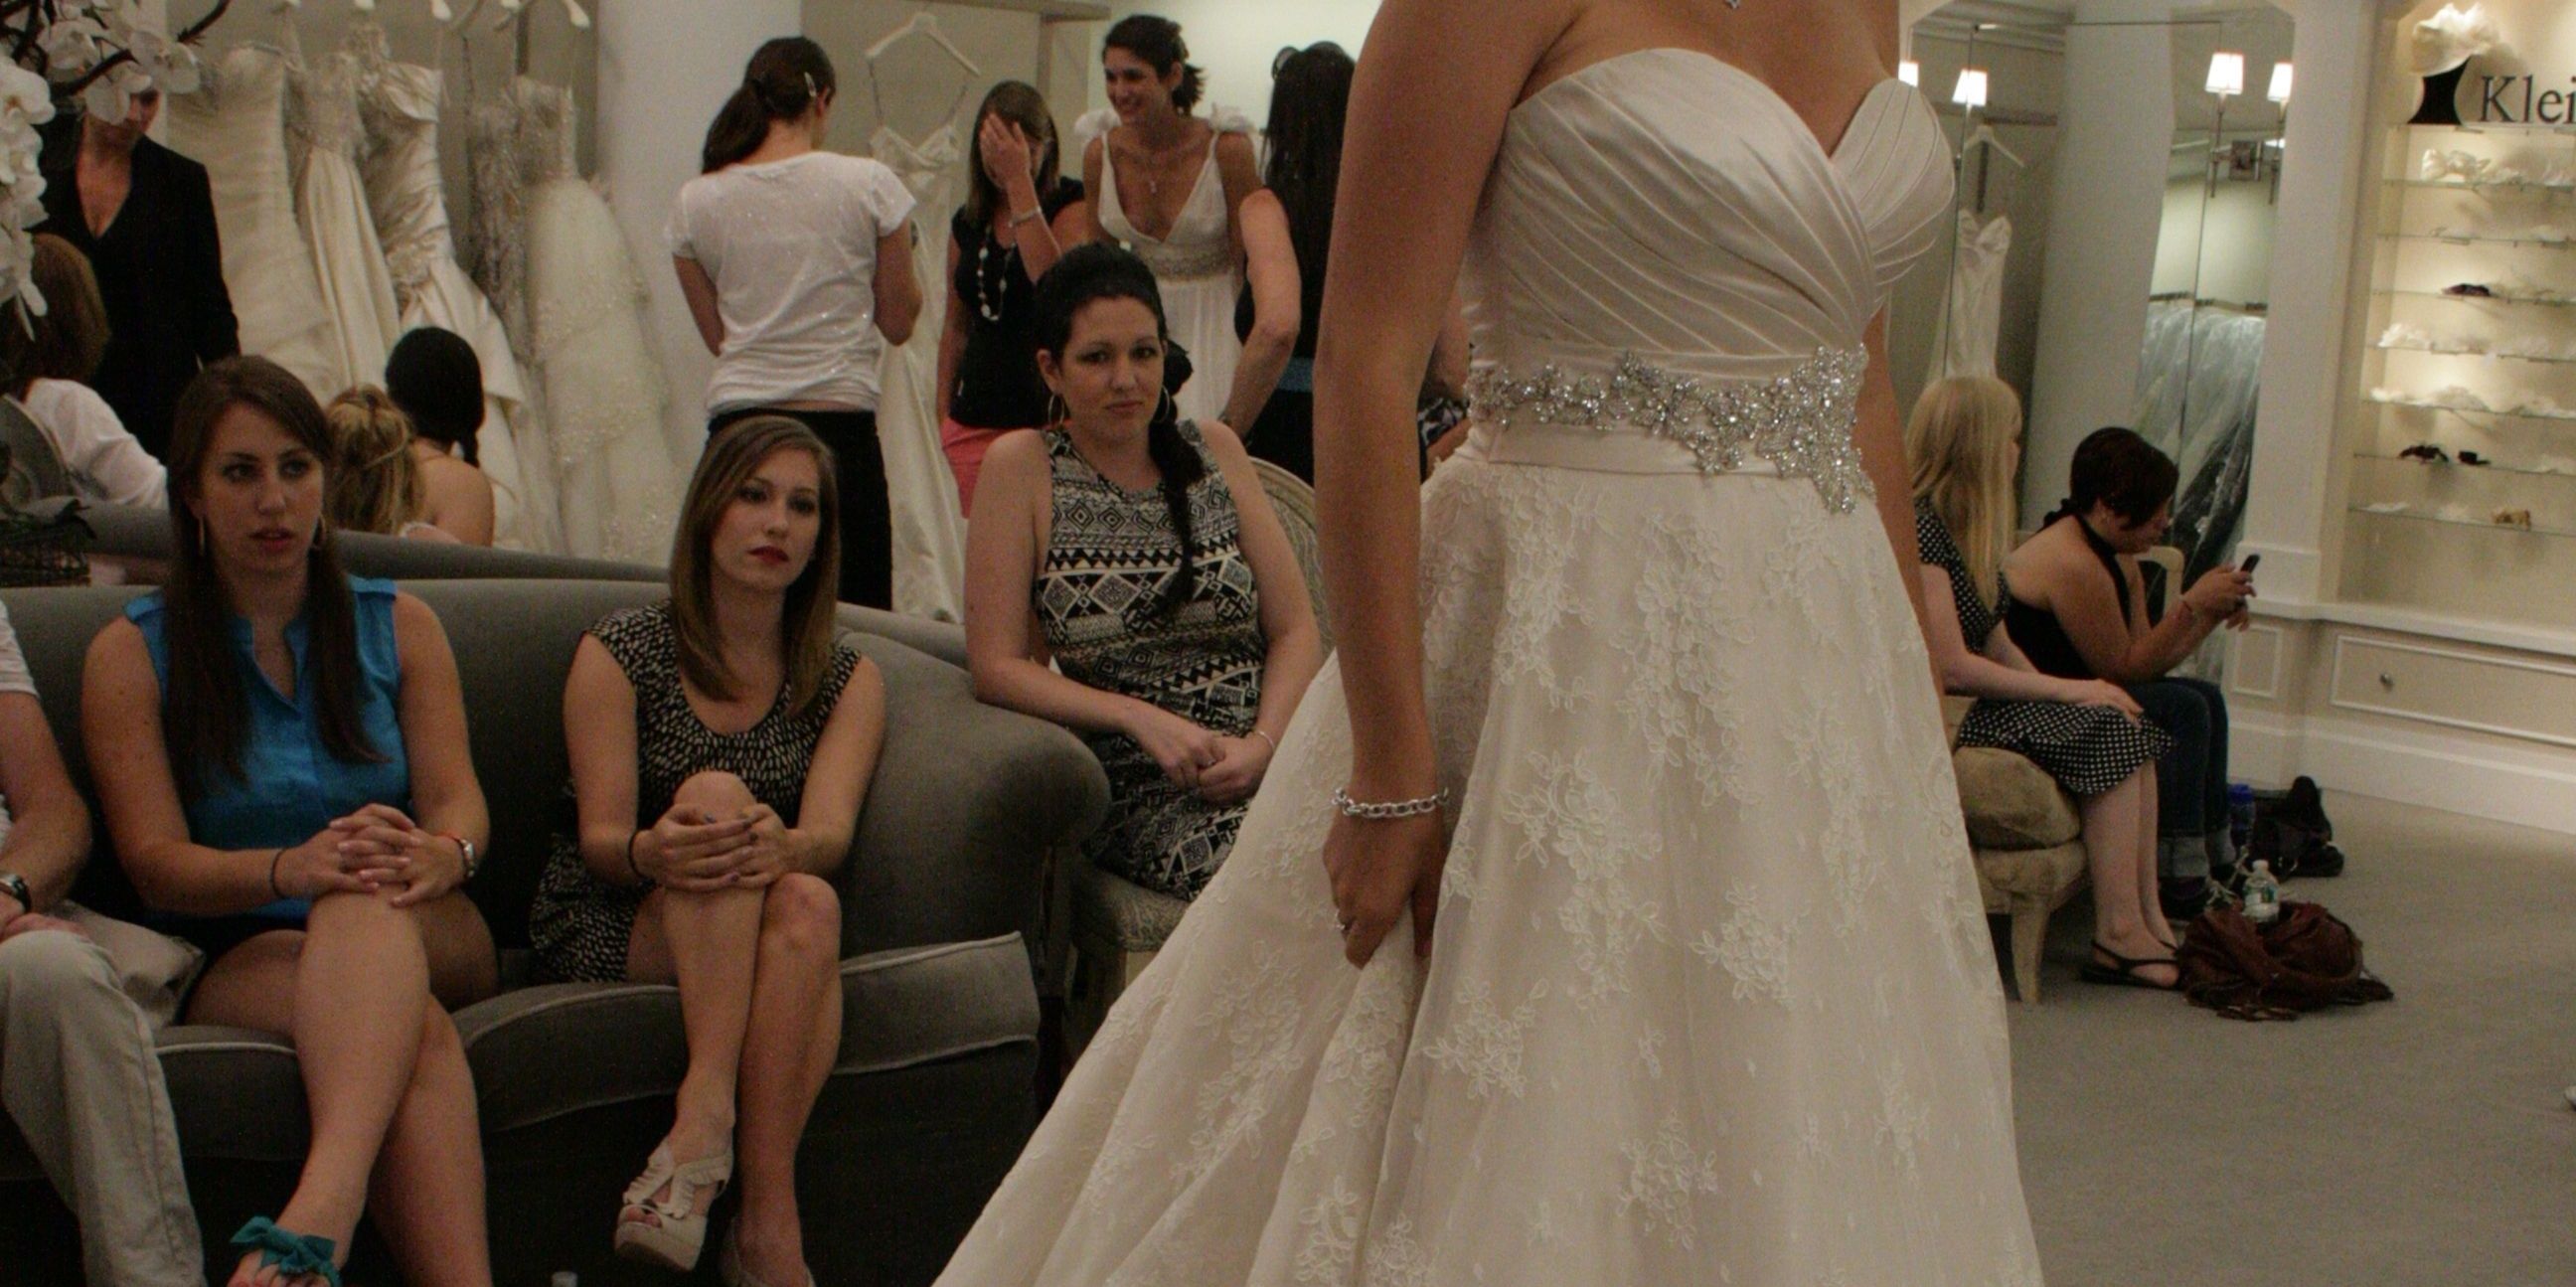 Say Yes To The Dress Top 10 Bridal Designers And Brands Featured On The Show